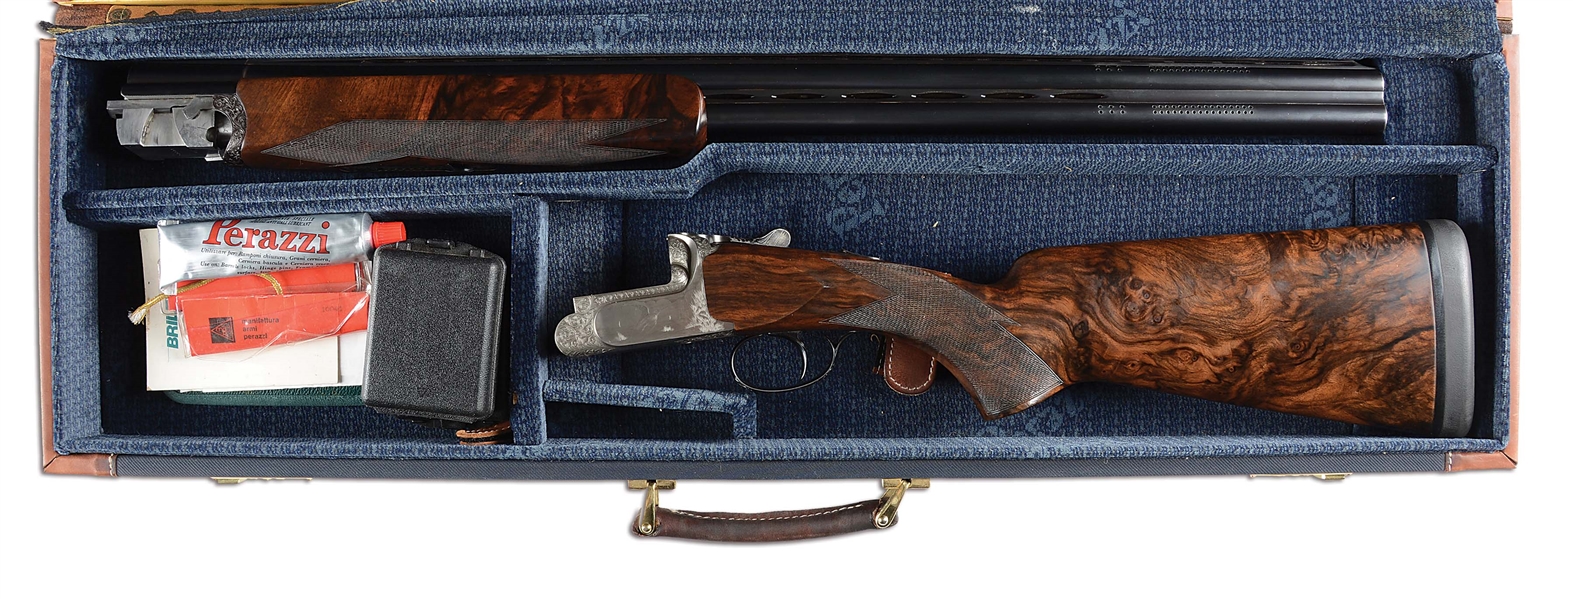 (M) PERAZZI SC-3 OVER-UNDER SHOTGUN WITH FINE SCROLL AND GAME SCENES BY ORLANDI AND CASE.